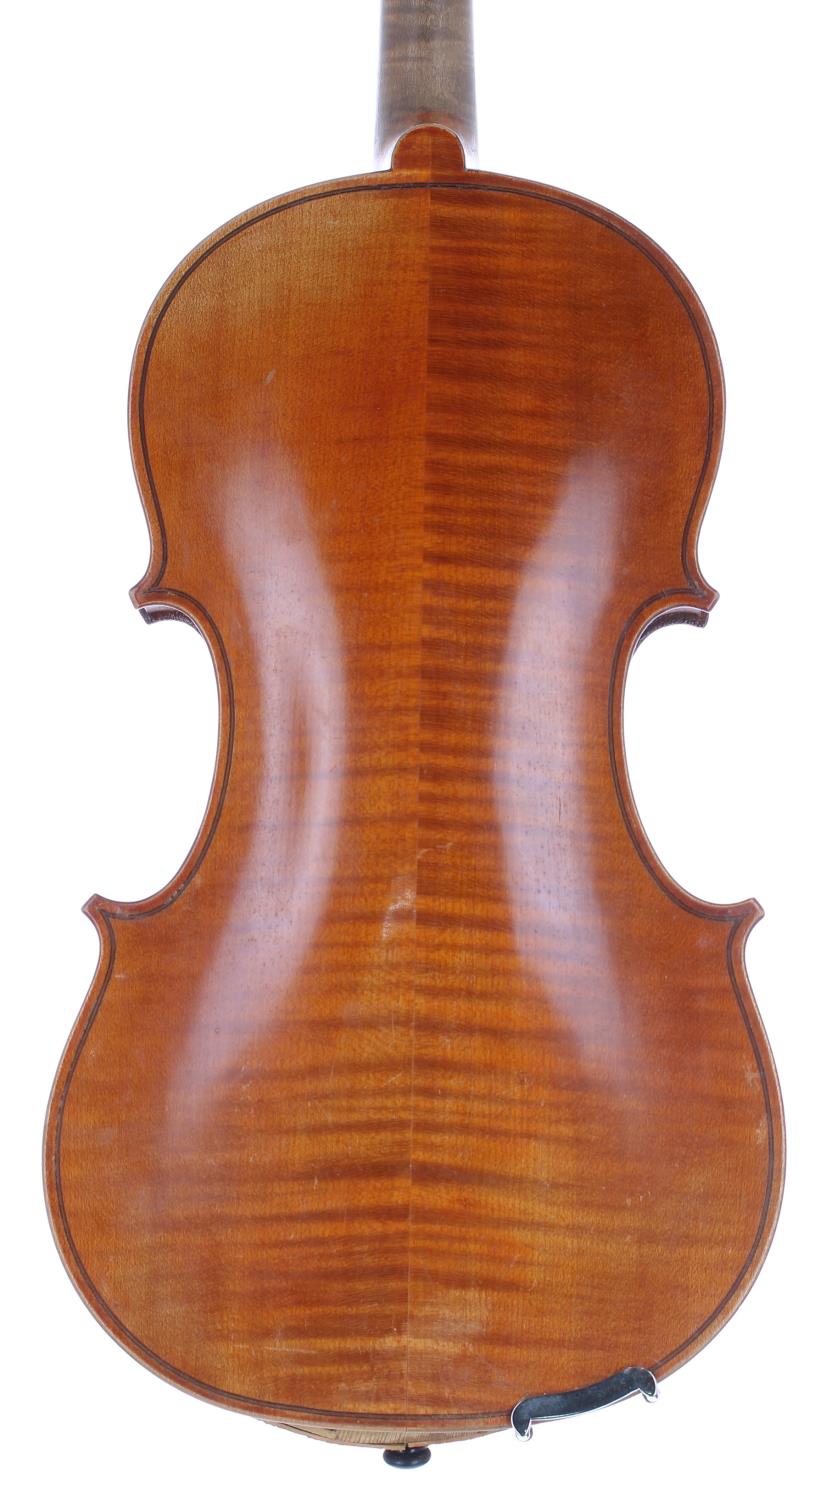 French violin circa 1920, 14 1/16", 35.70cm (at fault), two bows, case - Image 2 of 3